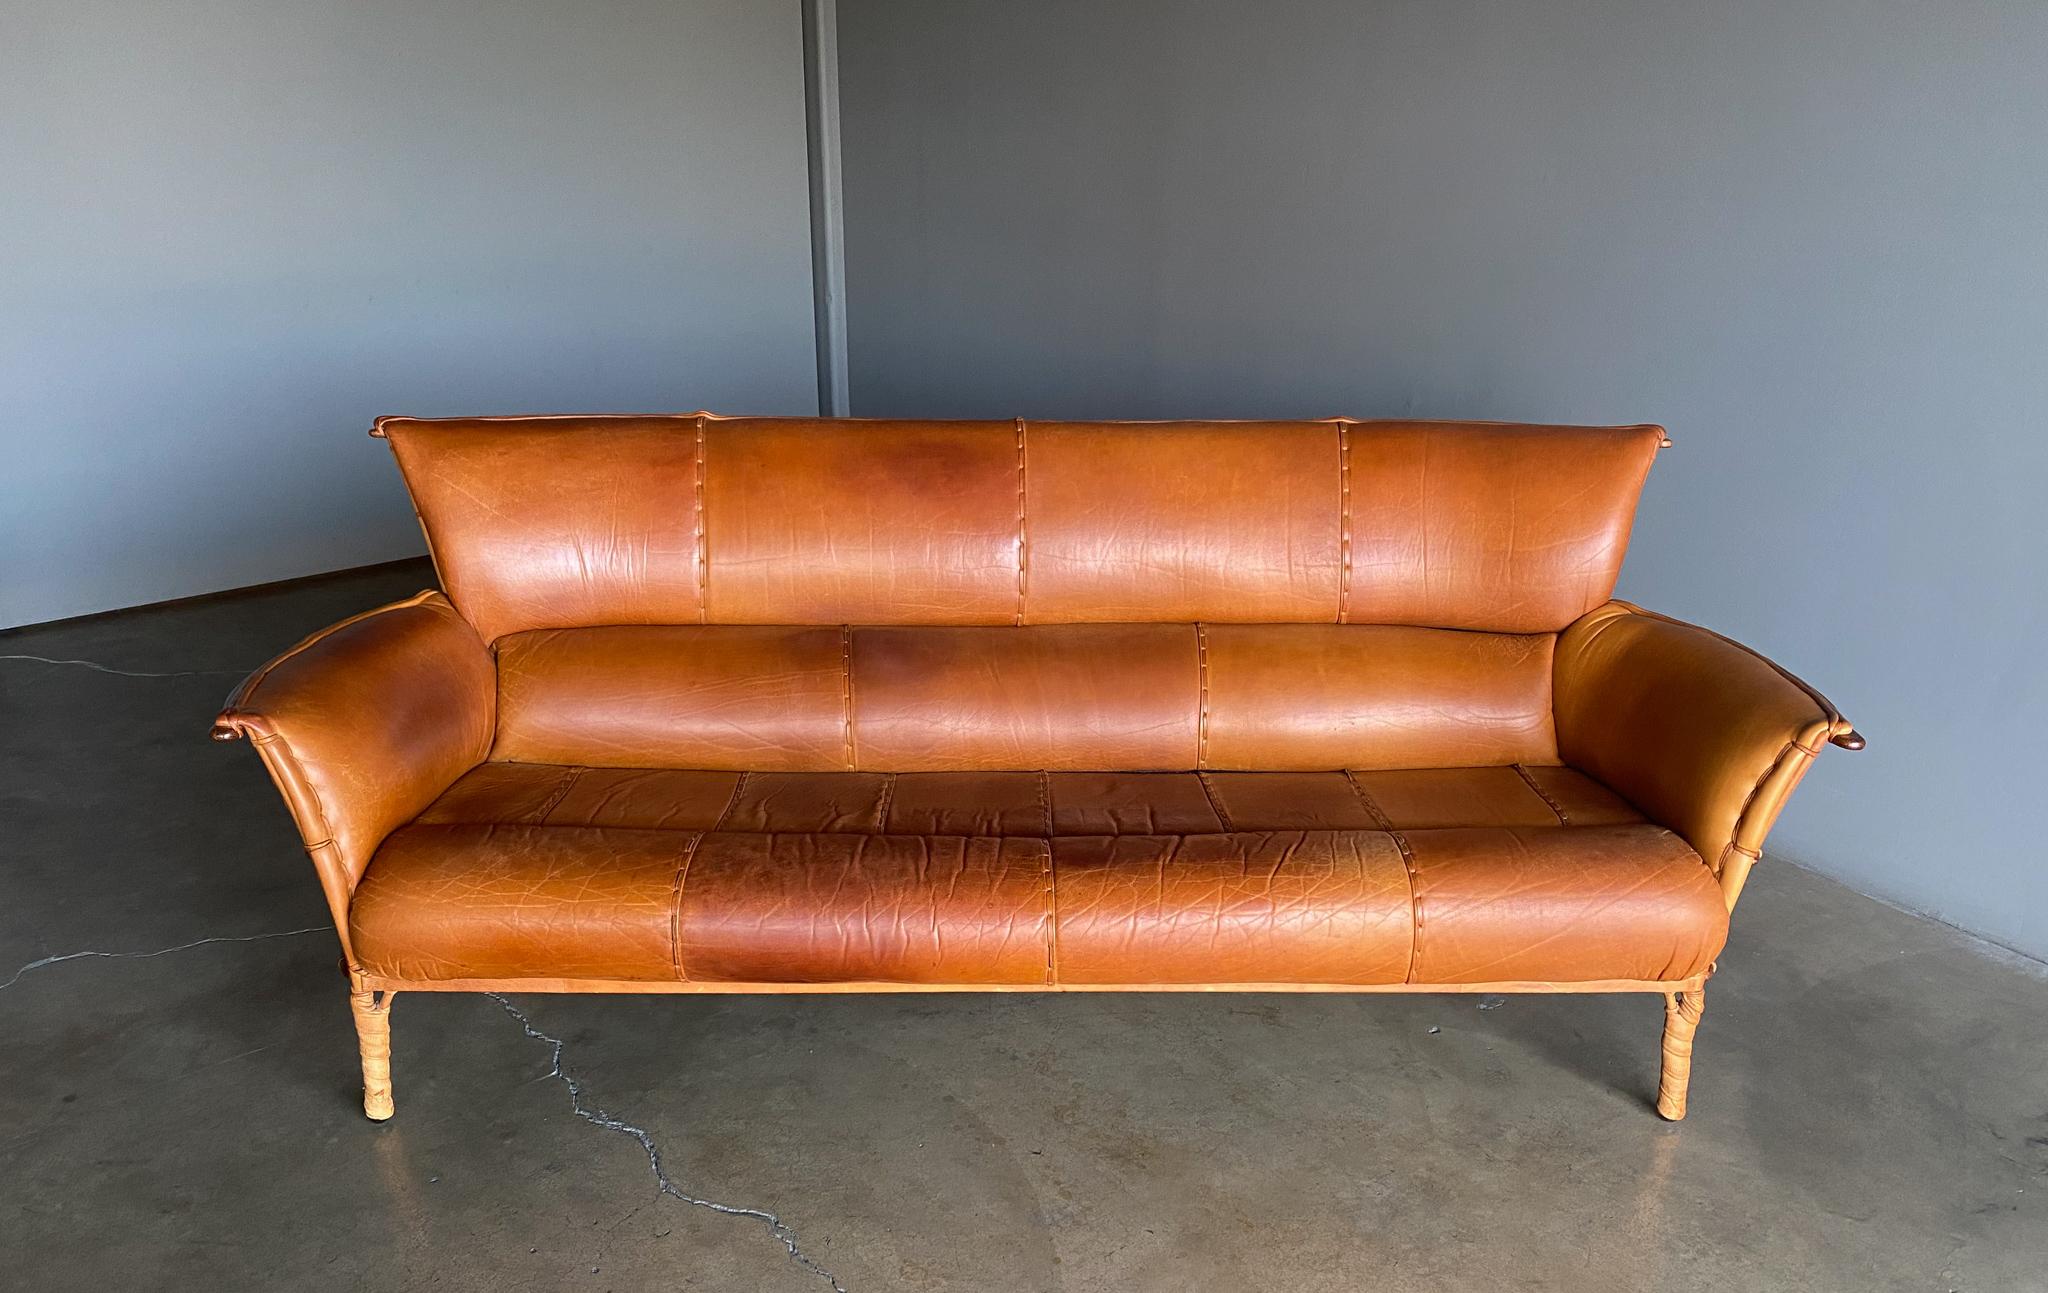 Pacific green Cognac leather & palmwood Navajo sofa, 1990's. Original condition with a beautiful patina to the leather.